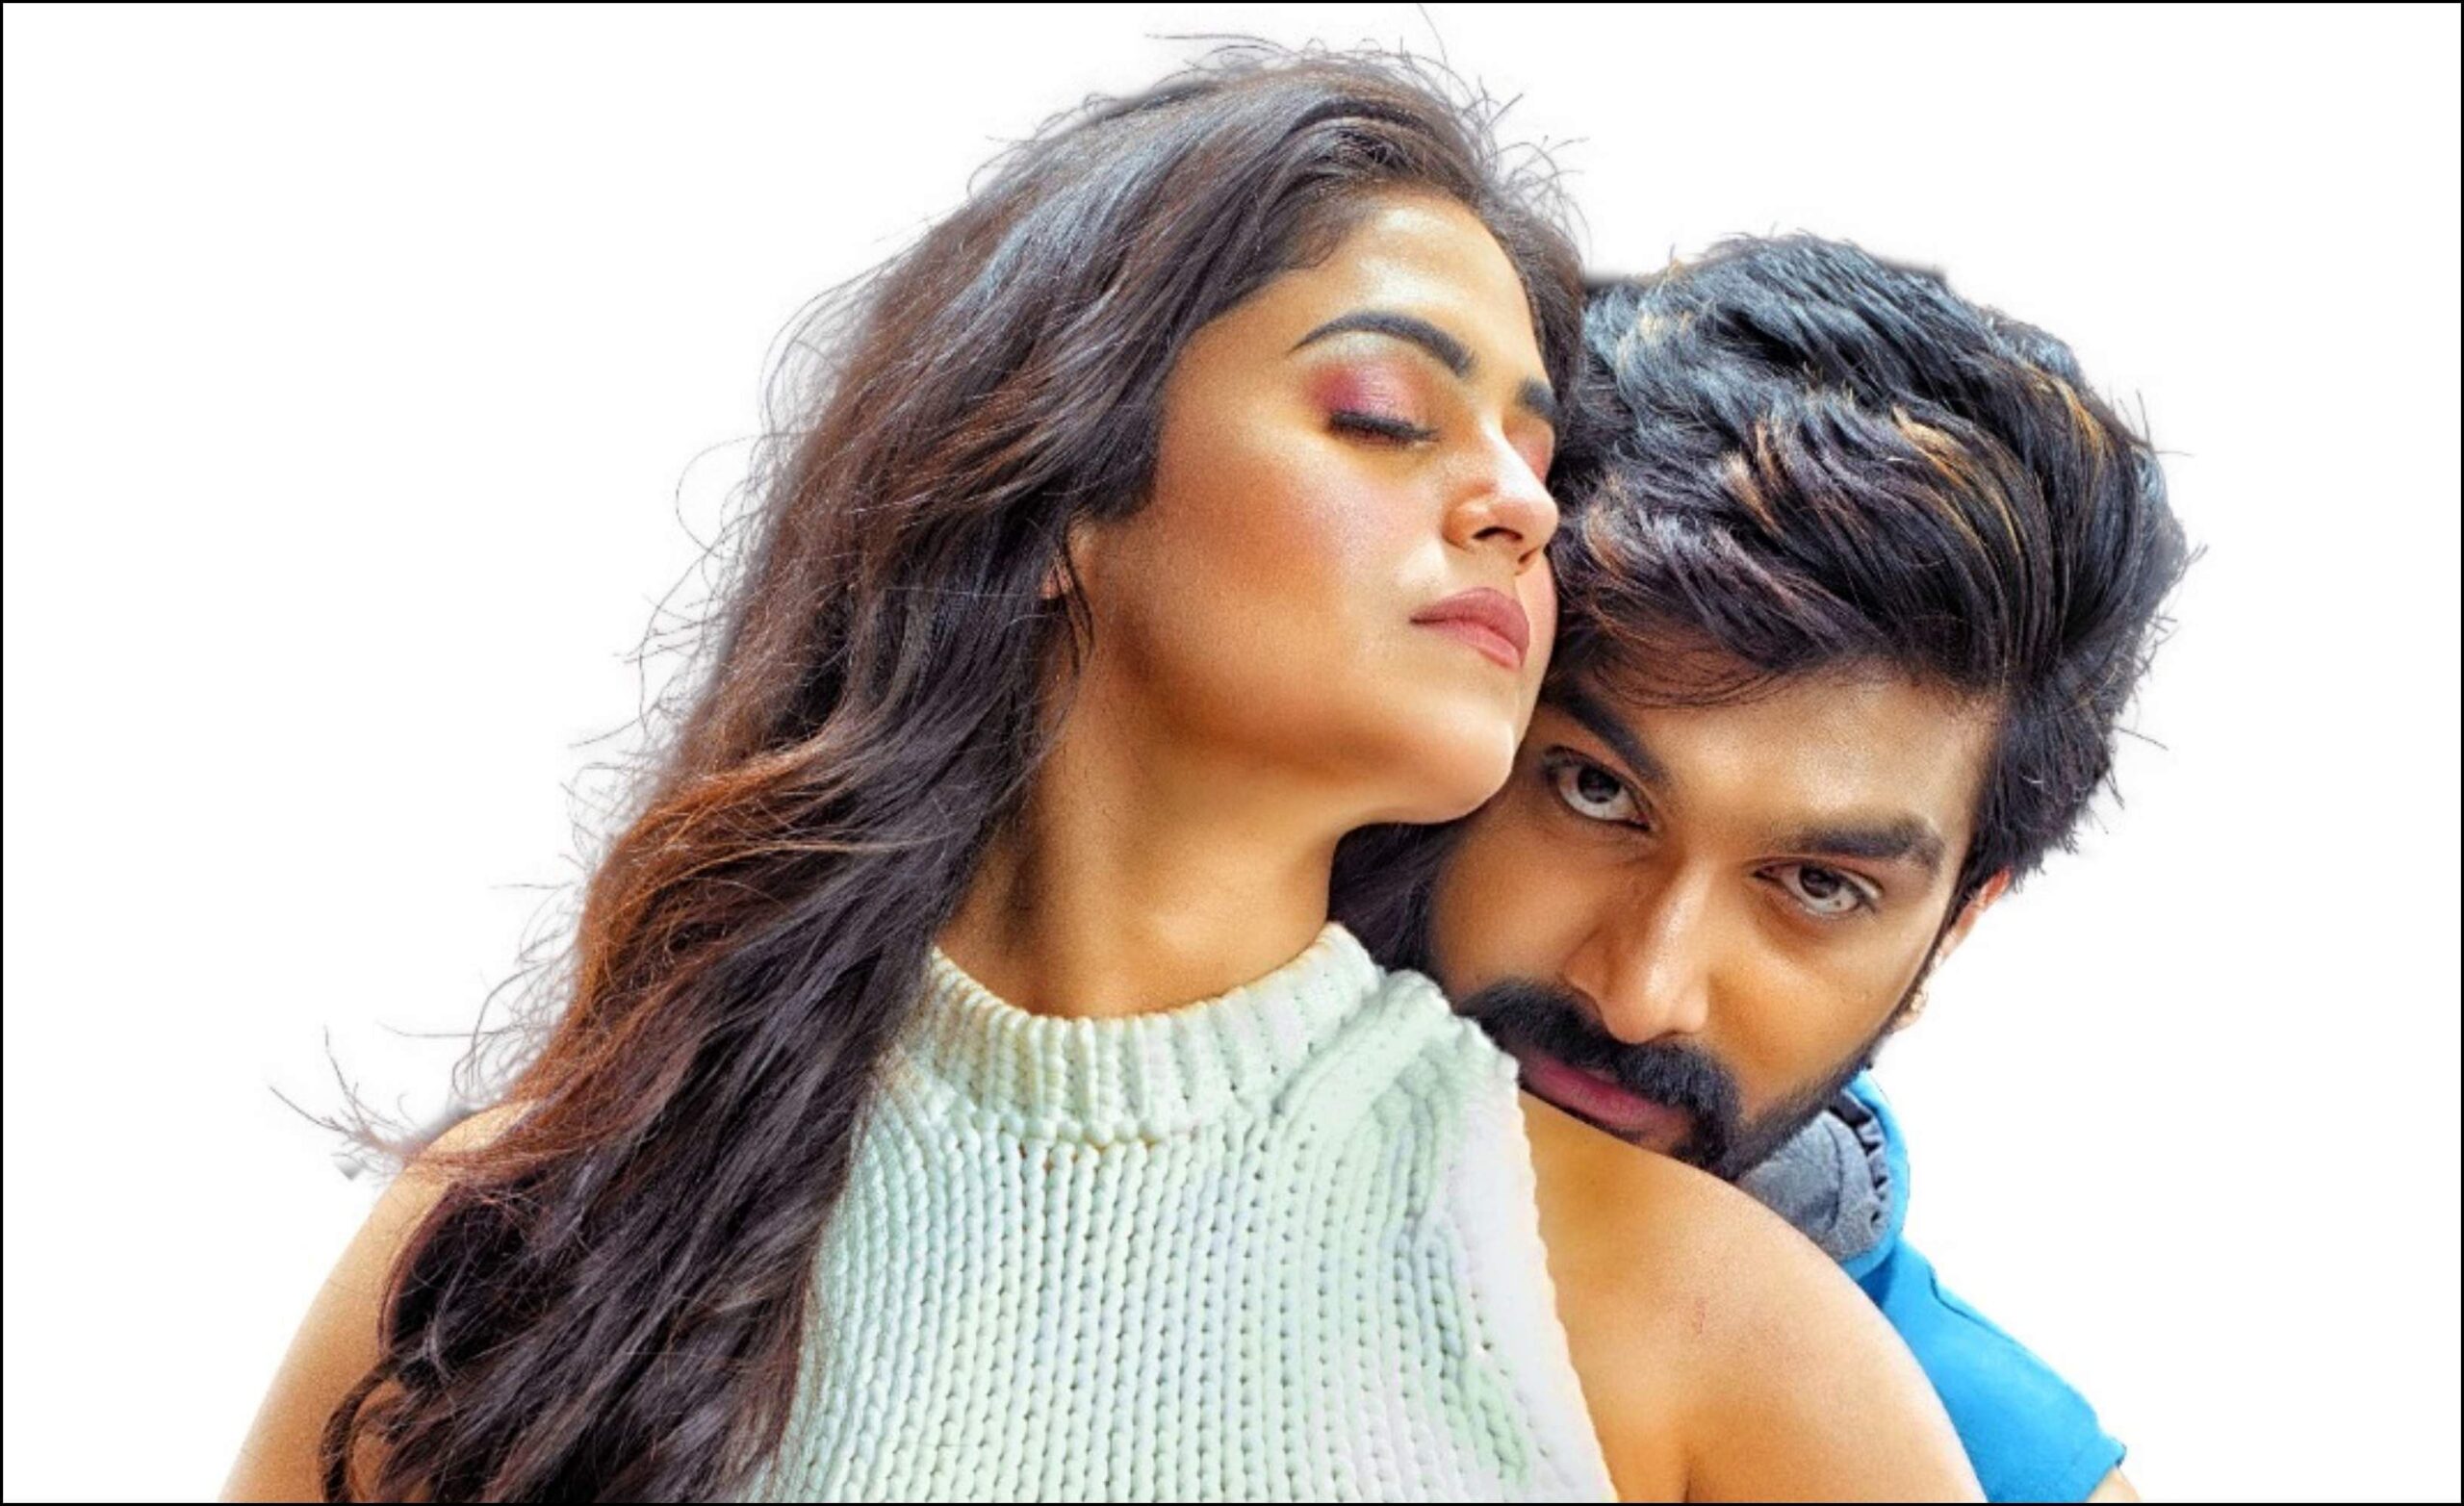 Pranayam makers look for an April release